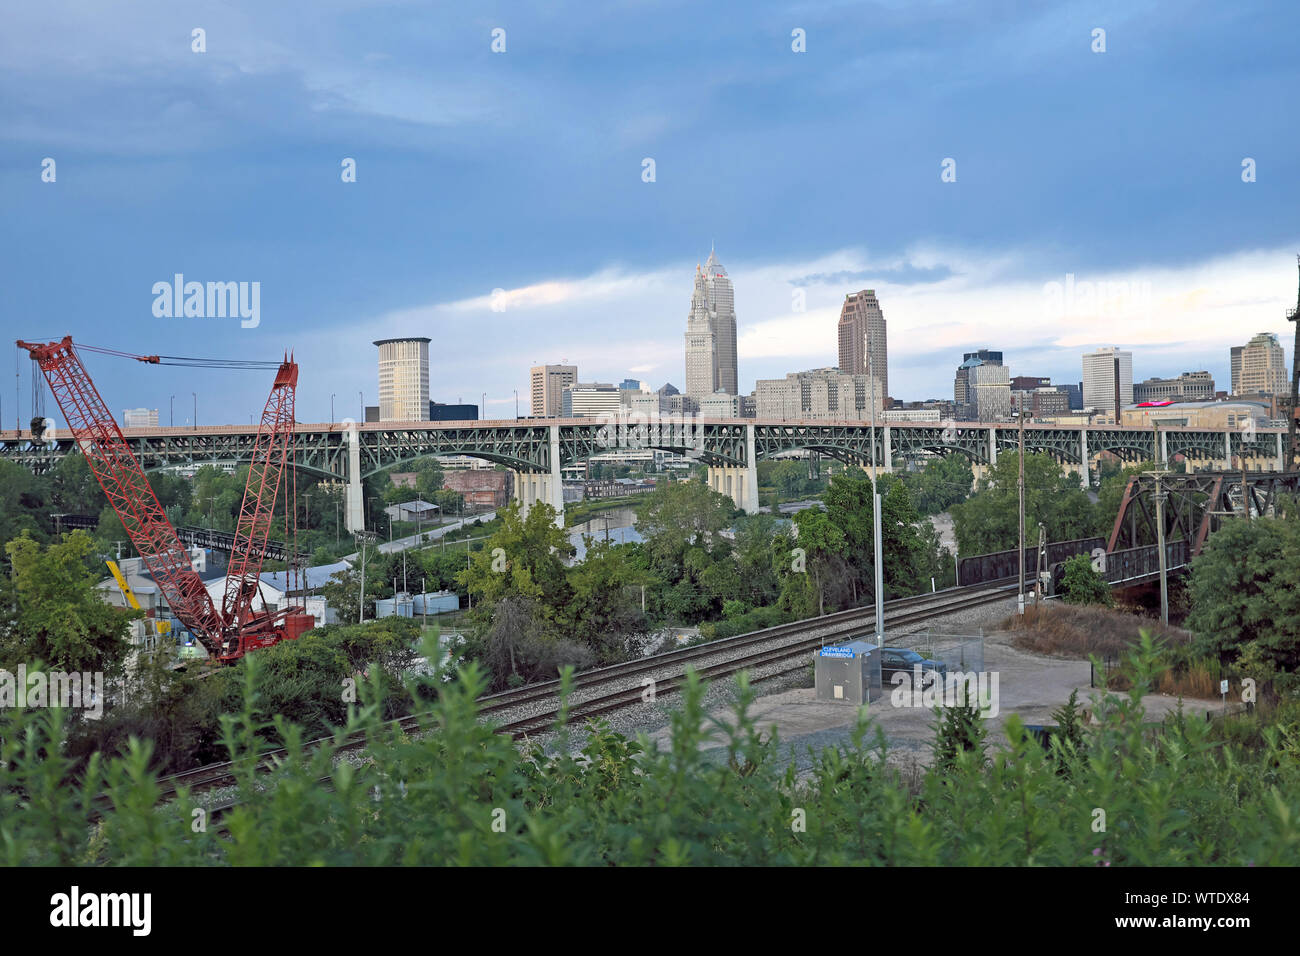 A view of downtown Cleveland Ohio from the Tremont neighborhood on September 2, 2019.  Formidable clouds point to ominous weather in the CLE. Stock Photo